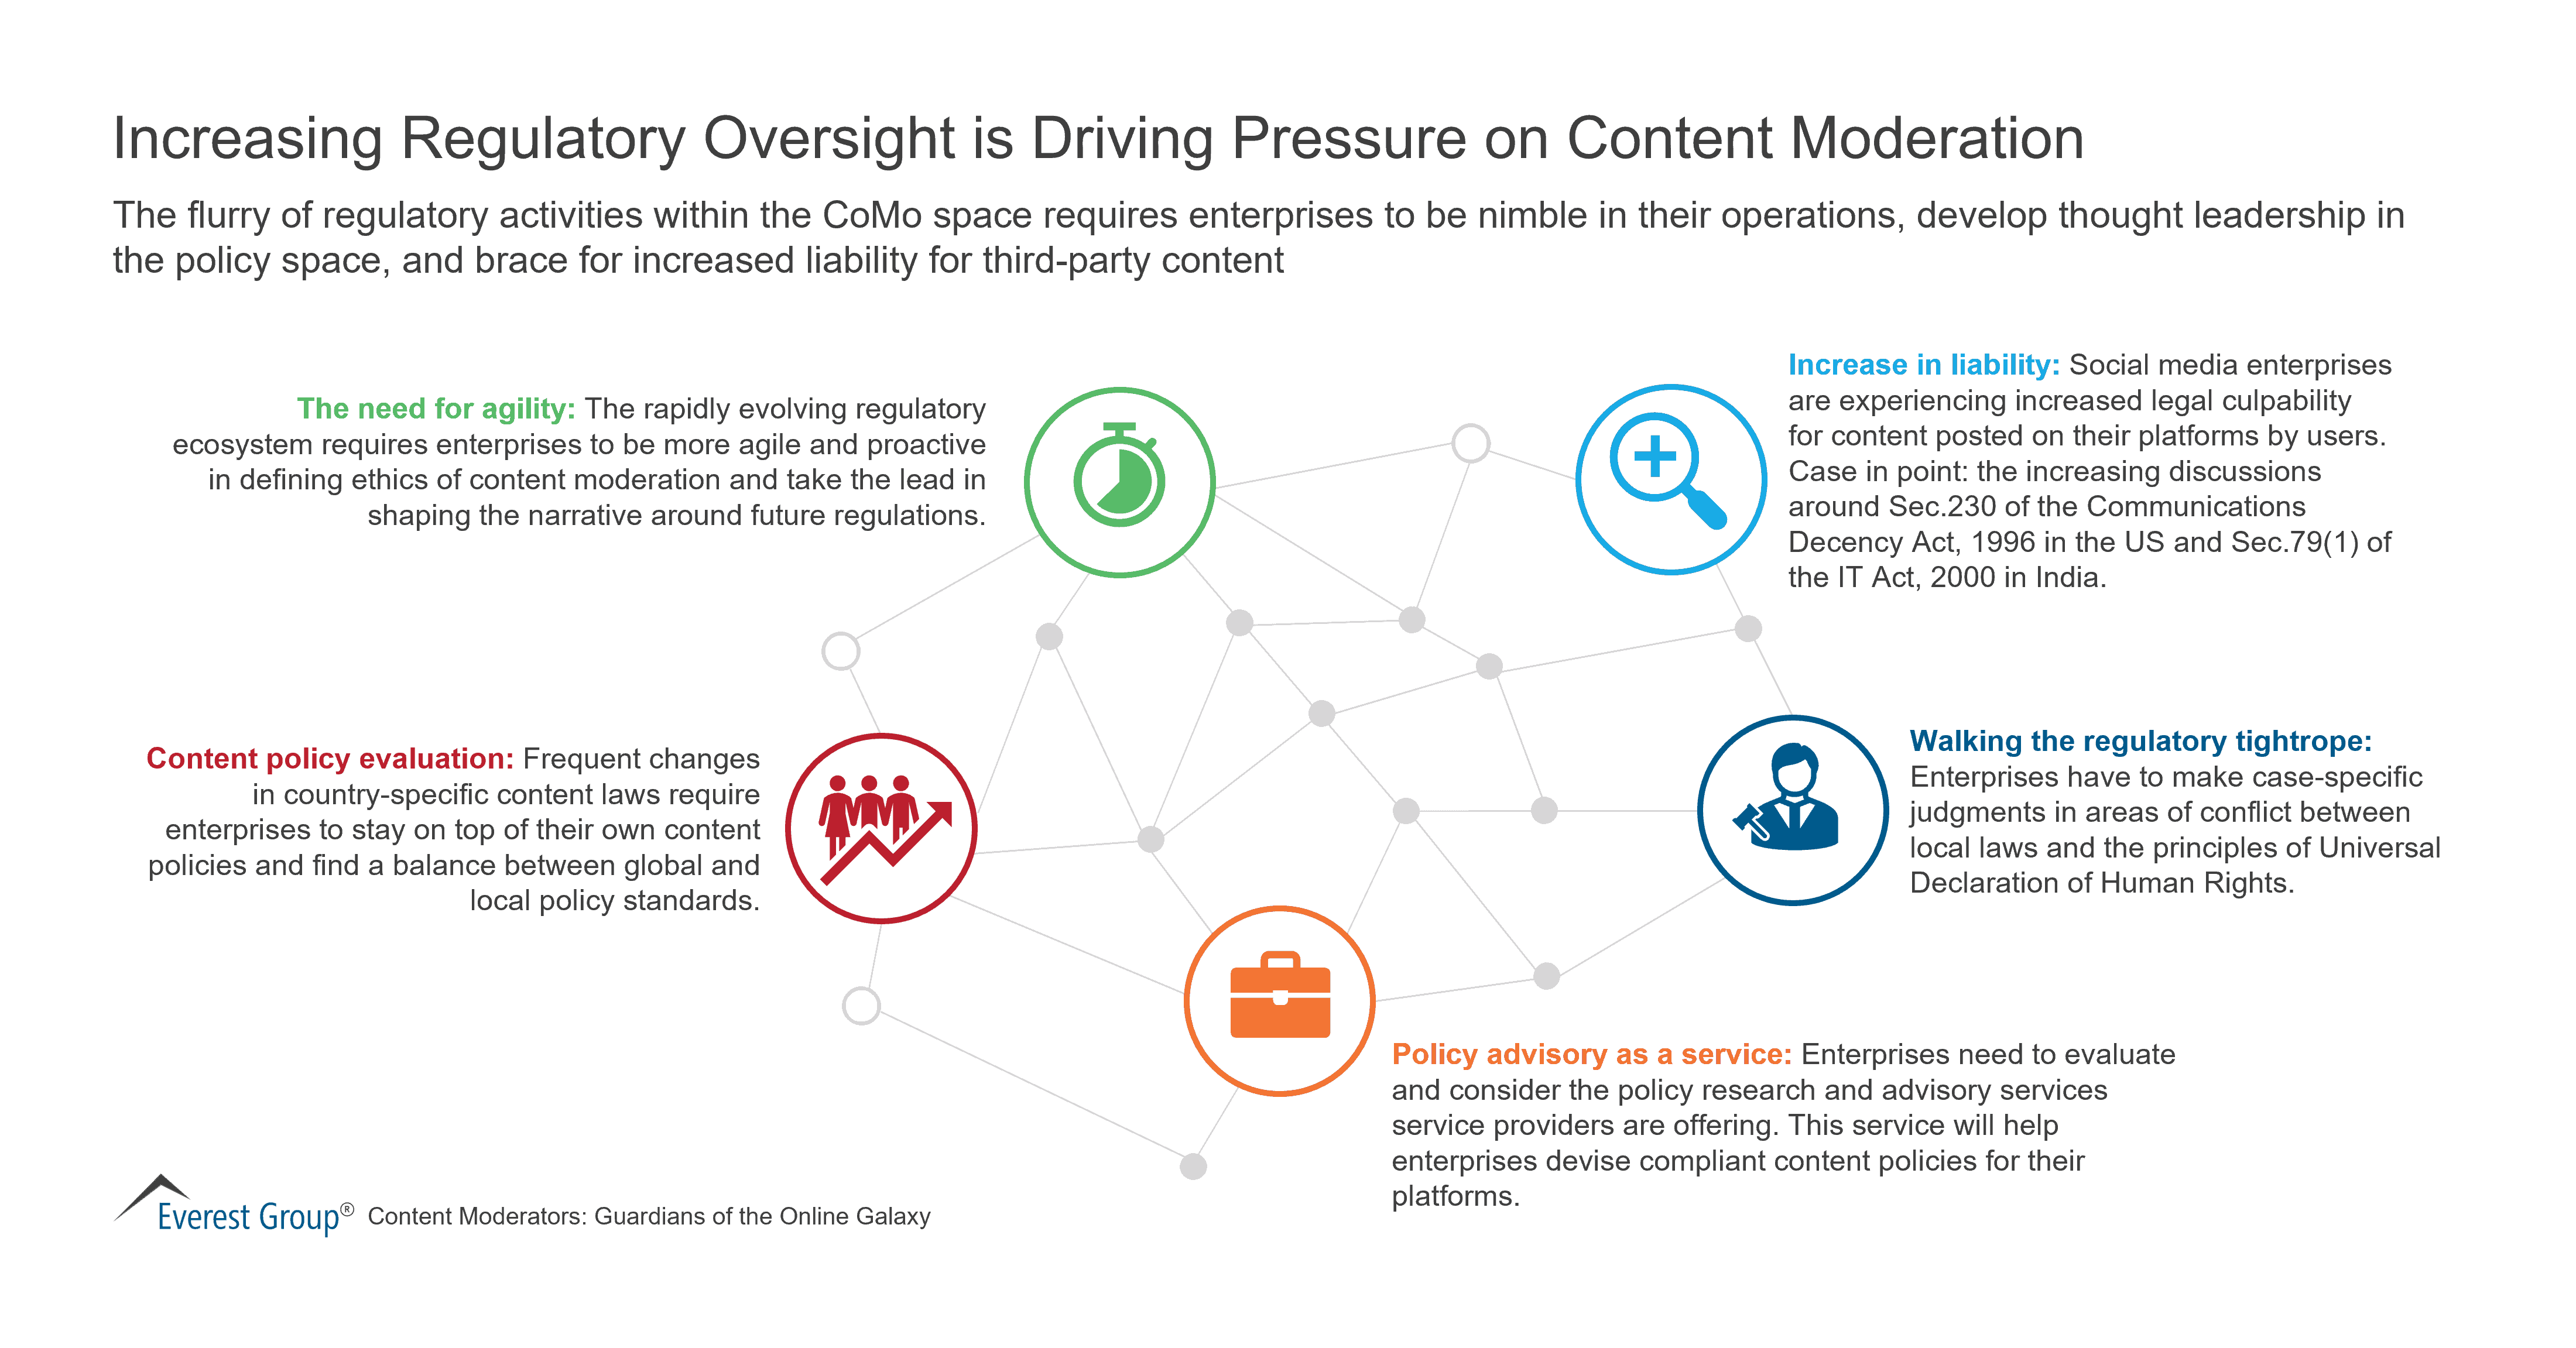 Increasing Regulatory Oversight is Driving Pressure on Content Moderation